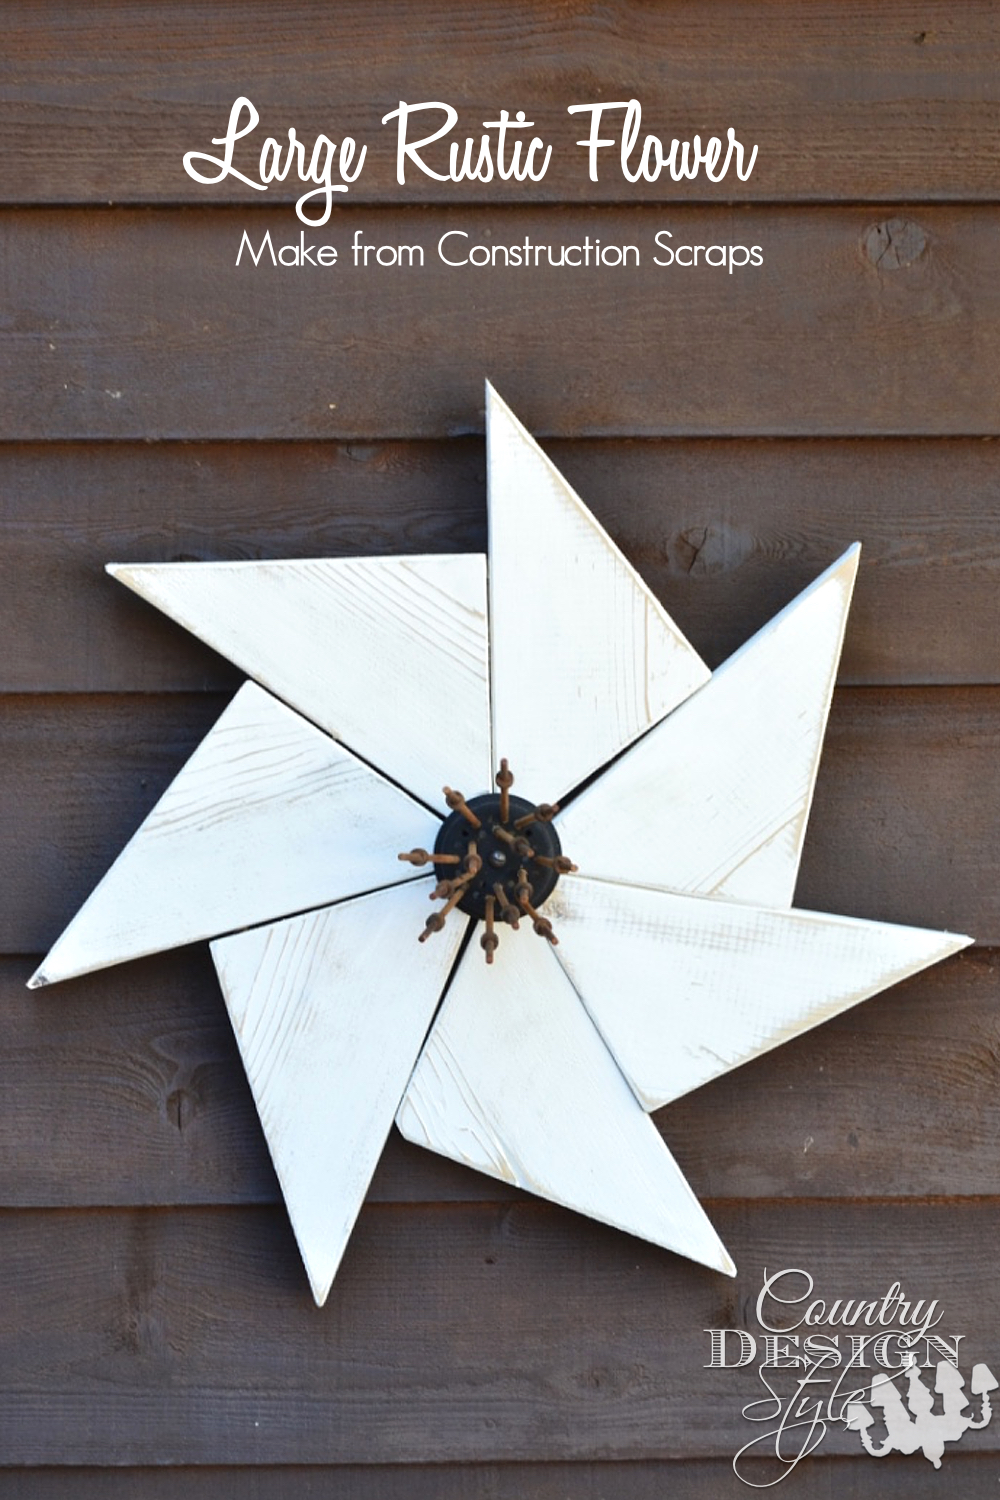 Rustic Flower made from construction scraps | Country Design Style | countrydesignstyle.com